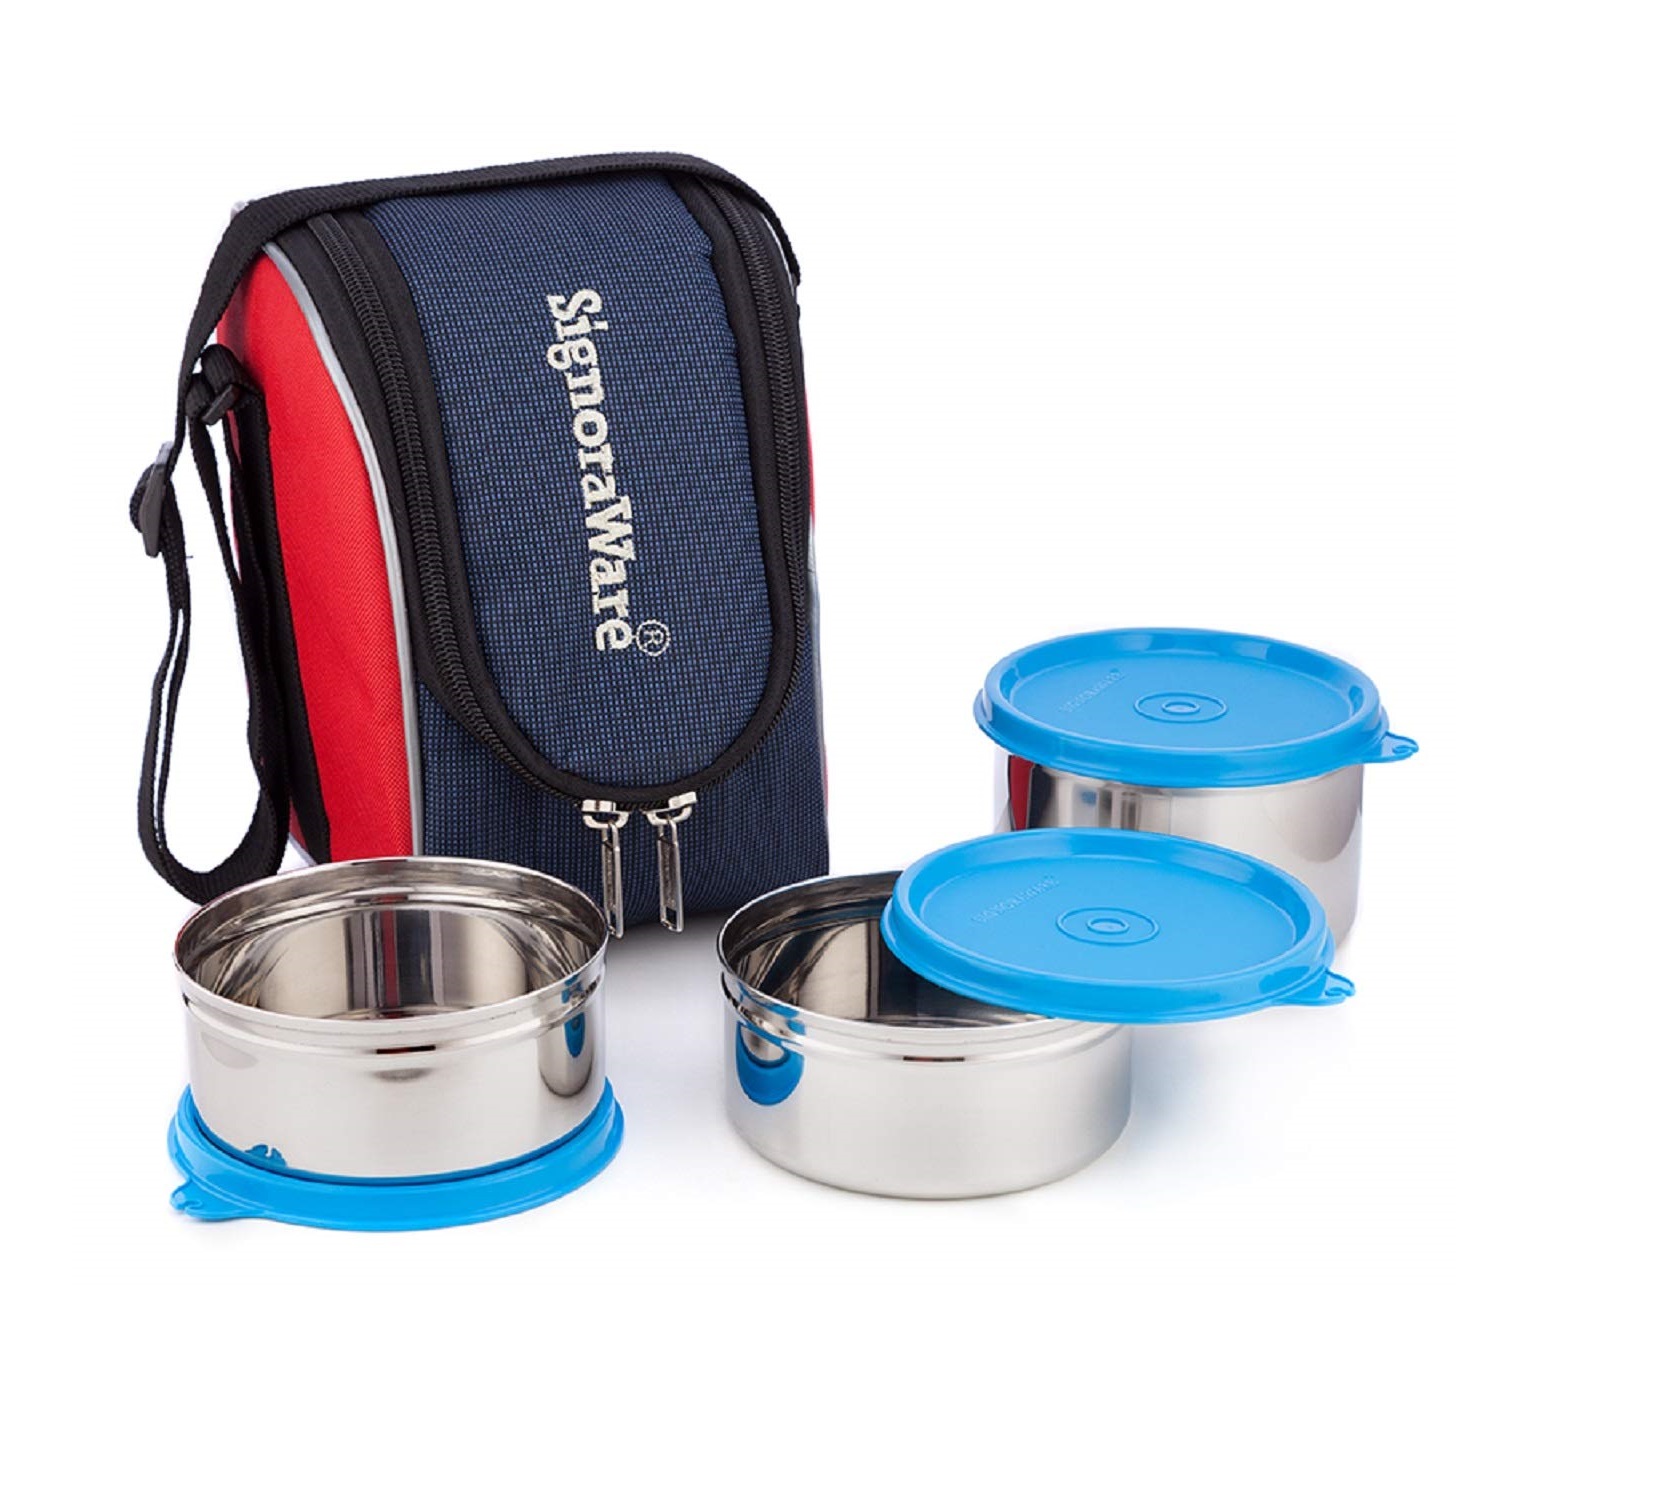 Synecart – Signoraware Executive Stainless Steel Lunch Box Online